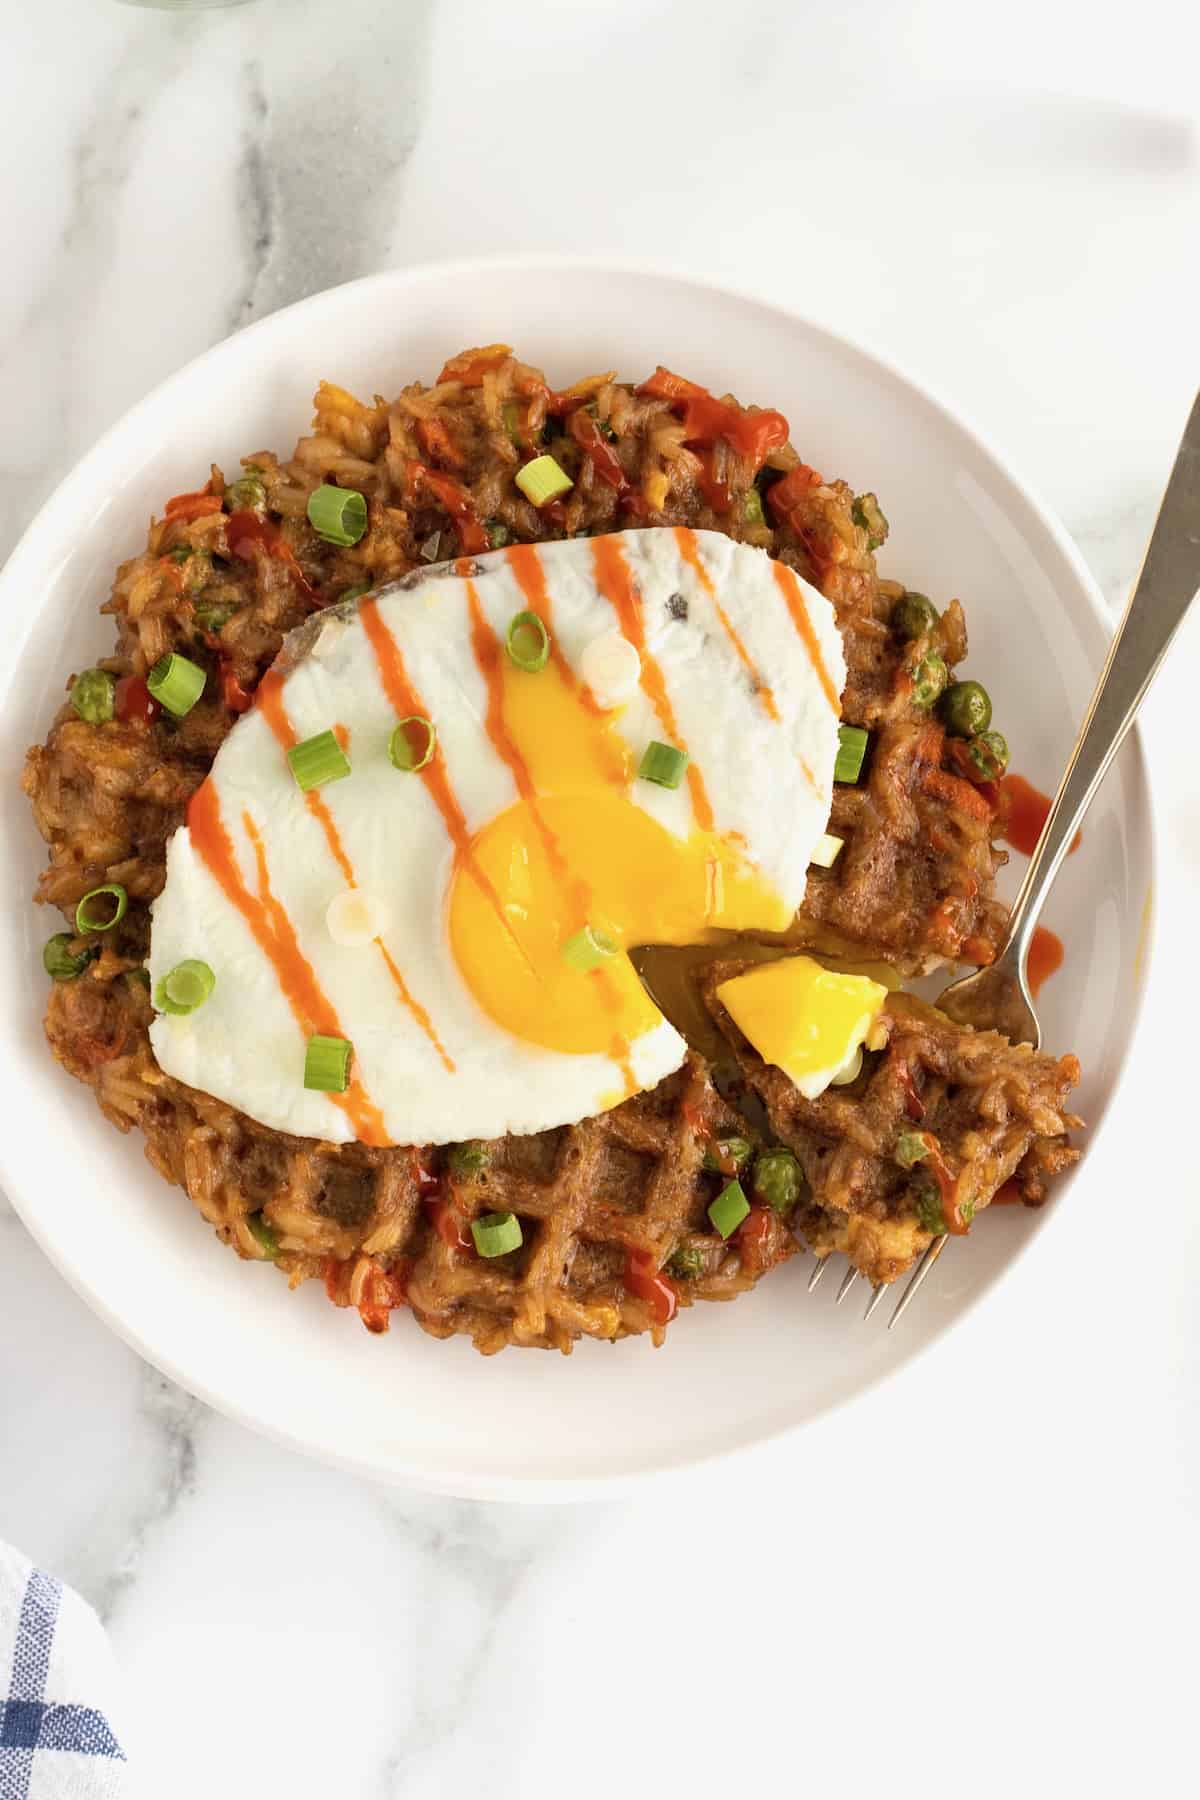 A fork with a bite of fried egg and leftover fried rice waffle.